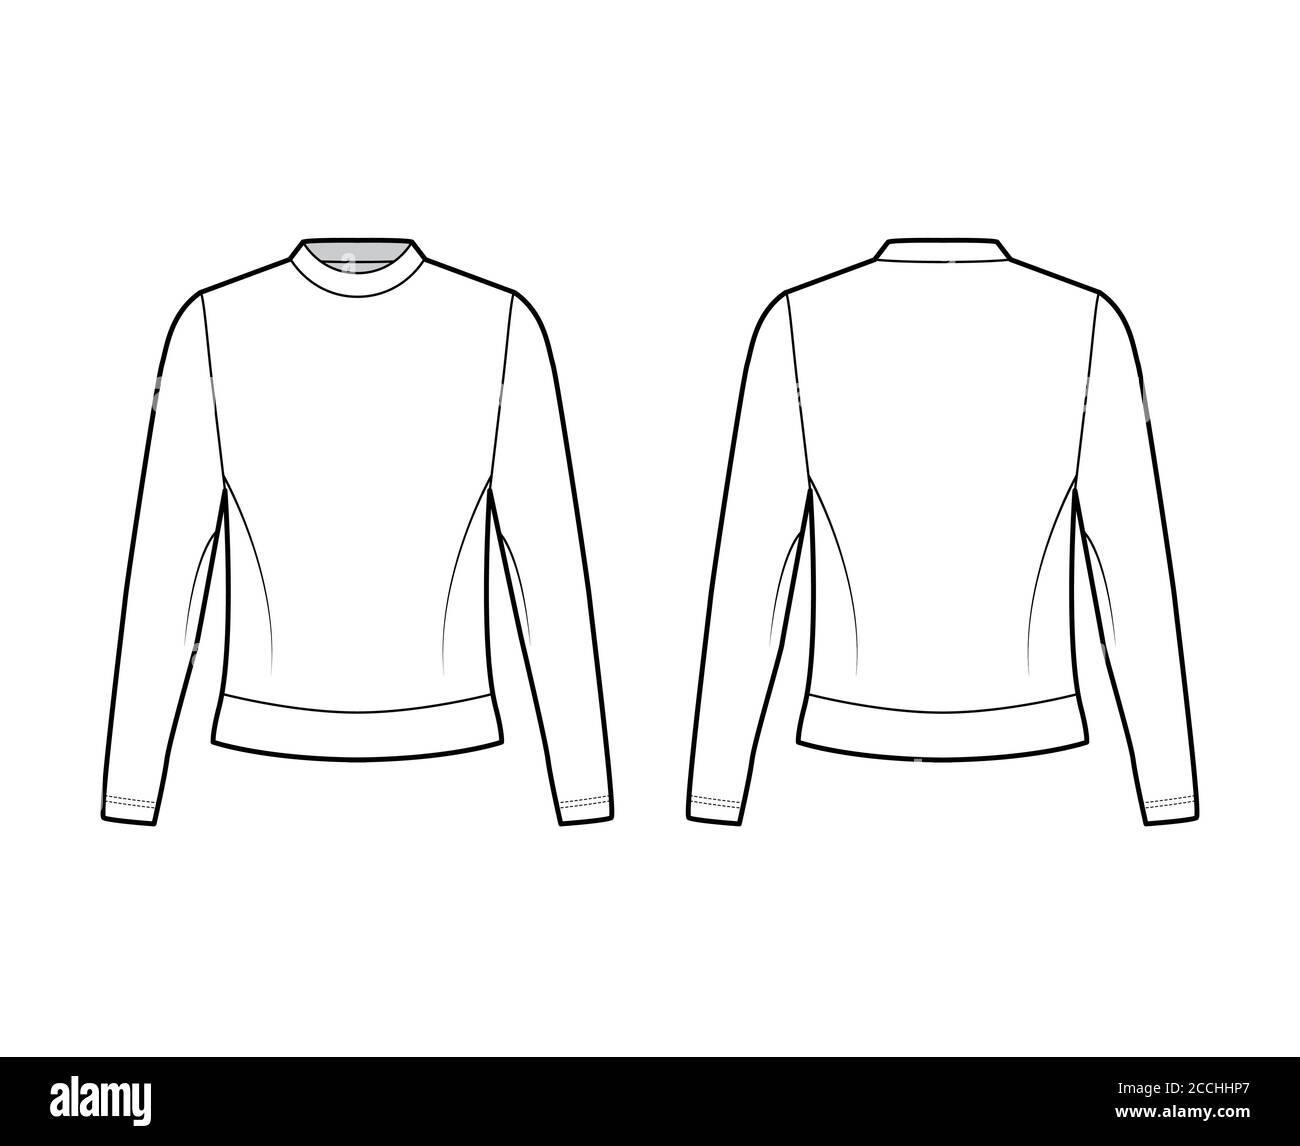 Cotton-terry sweatshirt technical fashion illustration with crew neckline, long sleeves, oversized. Flat jumper apparel outwear template front, back white color. Women, men, unisex top CAD mockup Stock Vector